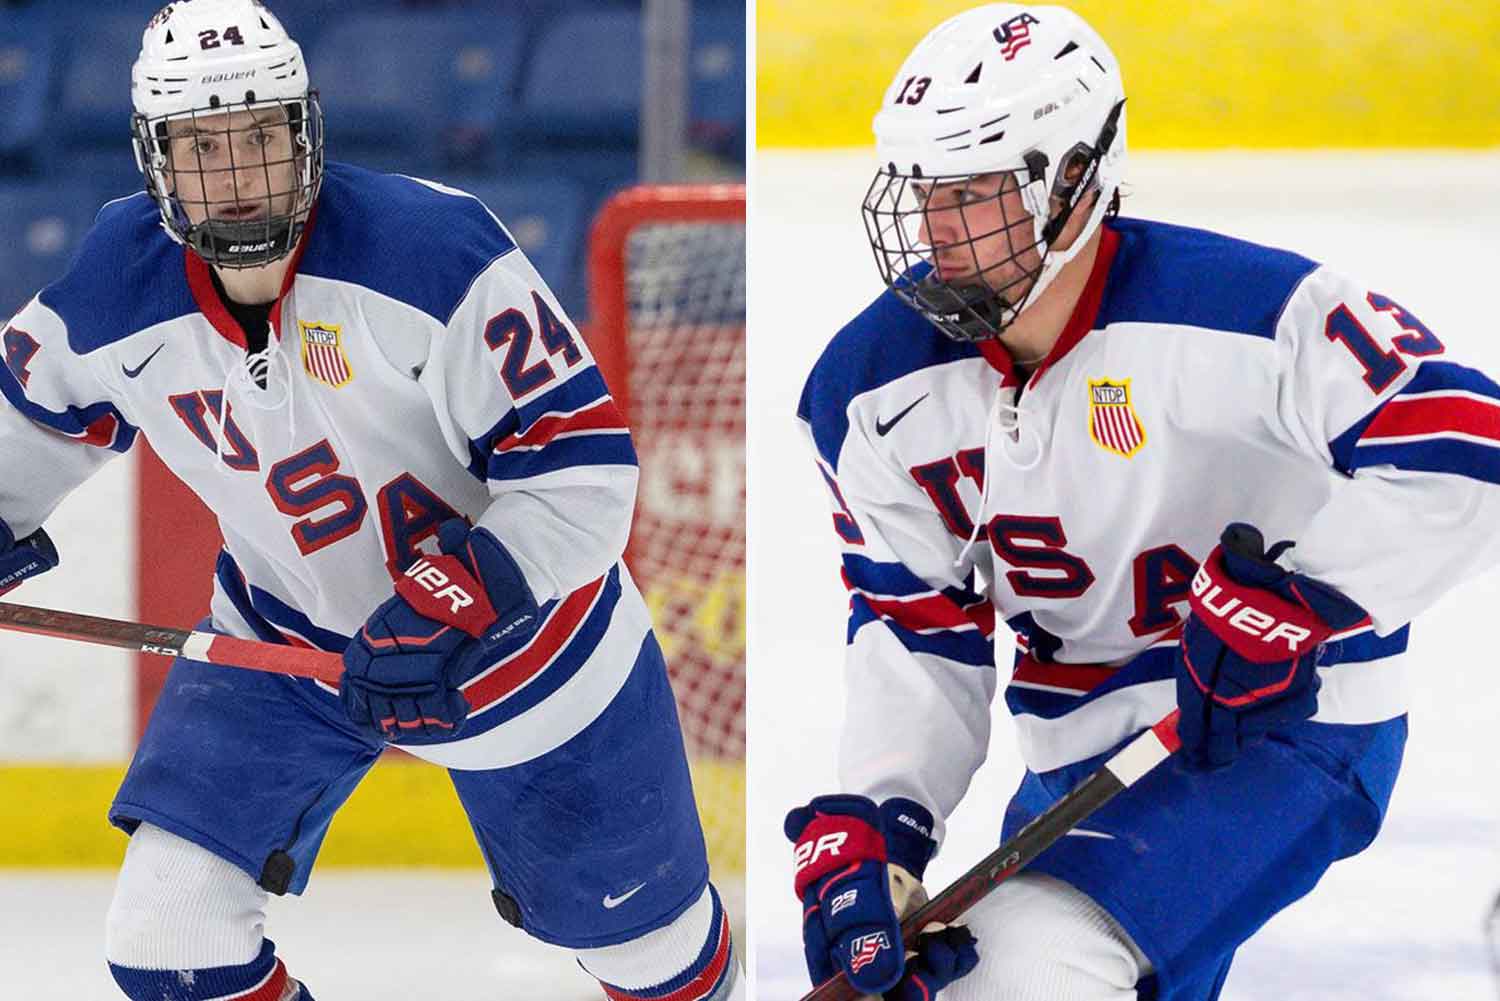 Two locally known hockey players drafted by NHL